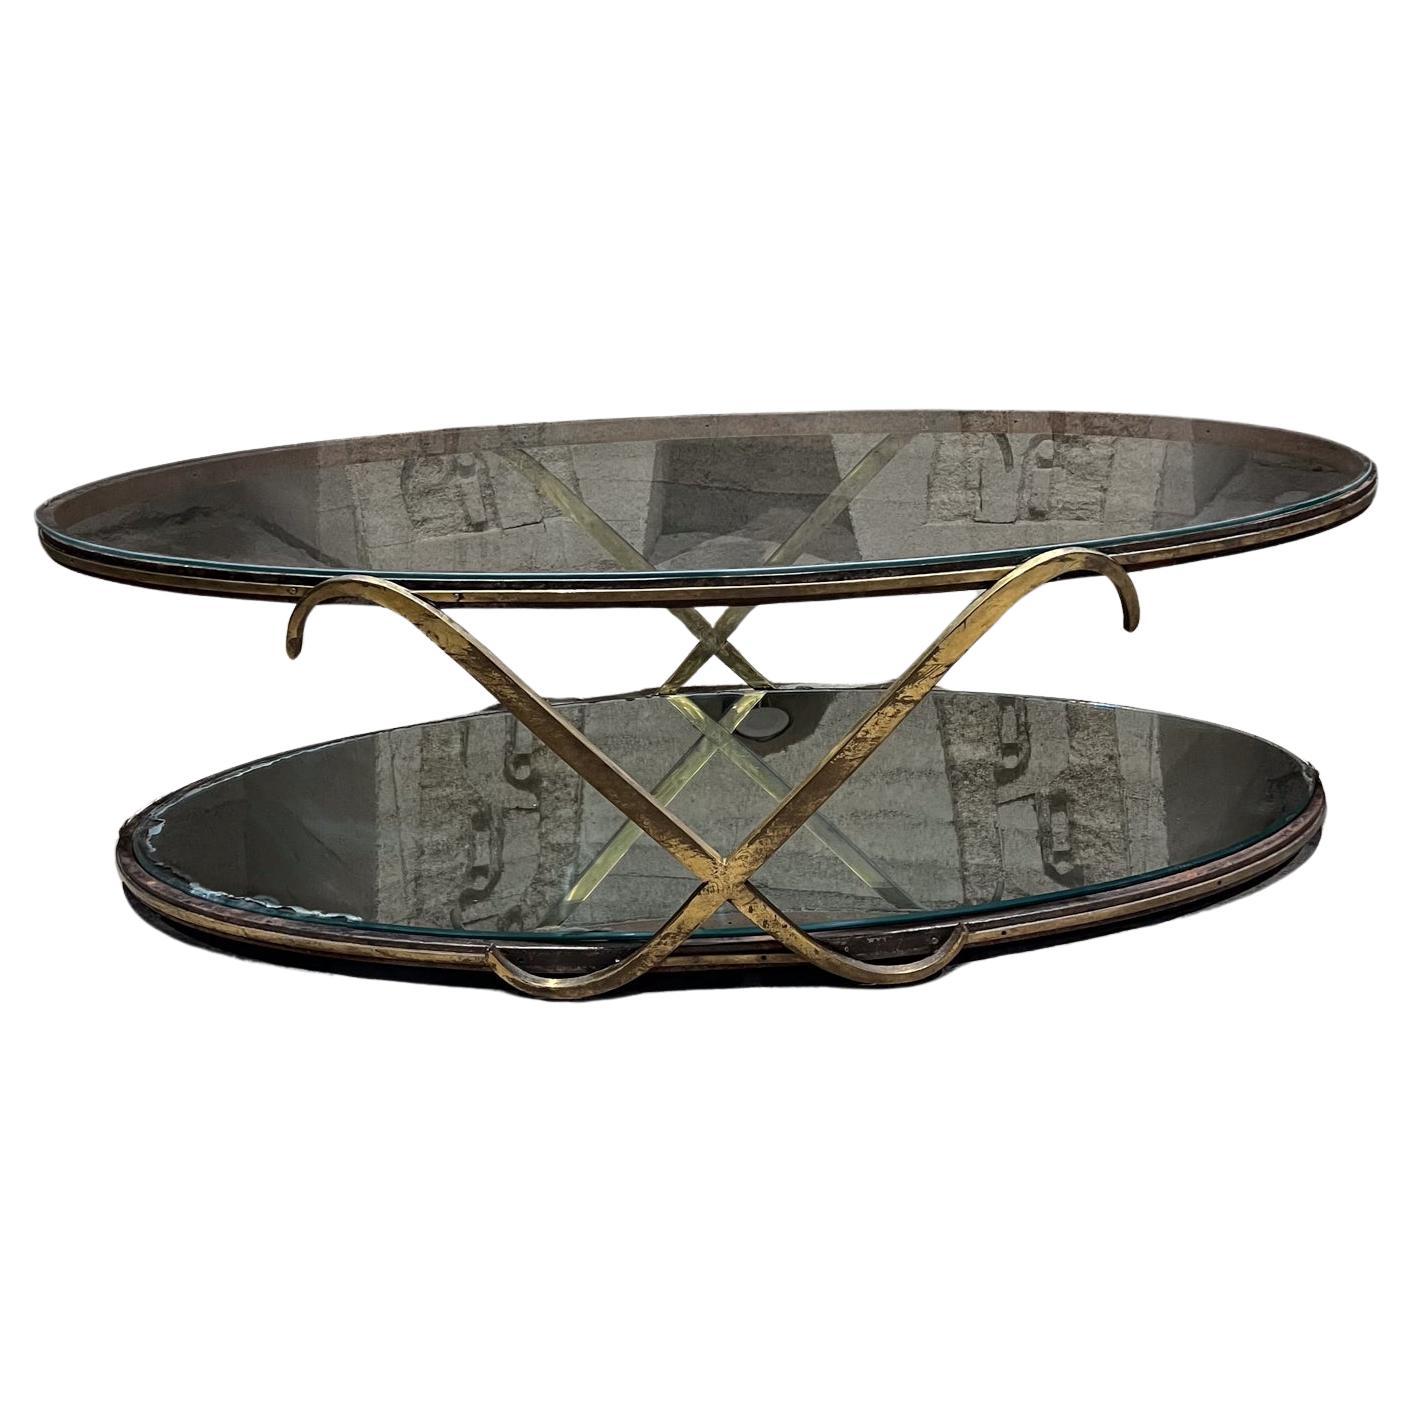 1950s Sculptural Tiered Coffee Table Arturo Pani Mexico City